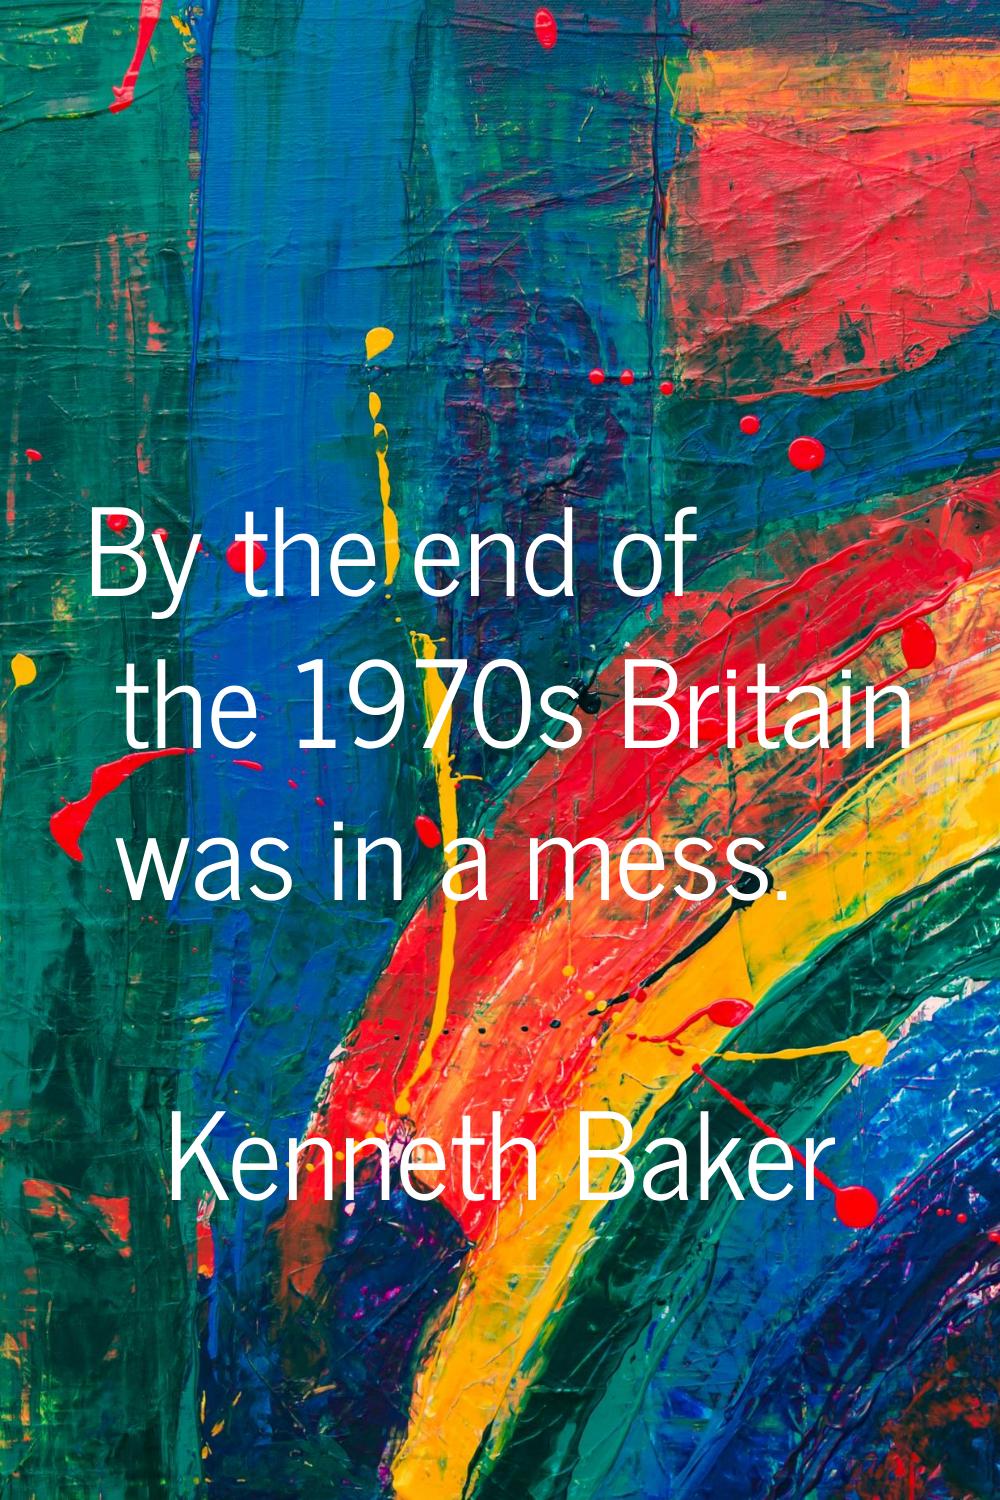 By the end of the 1970s Britain was in a mess.